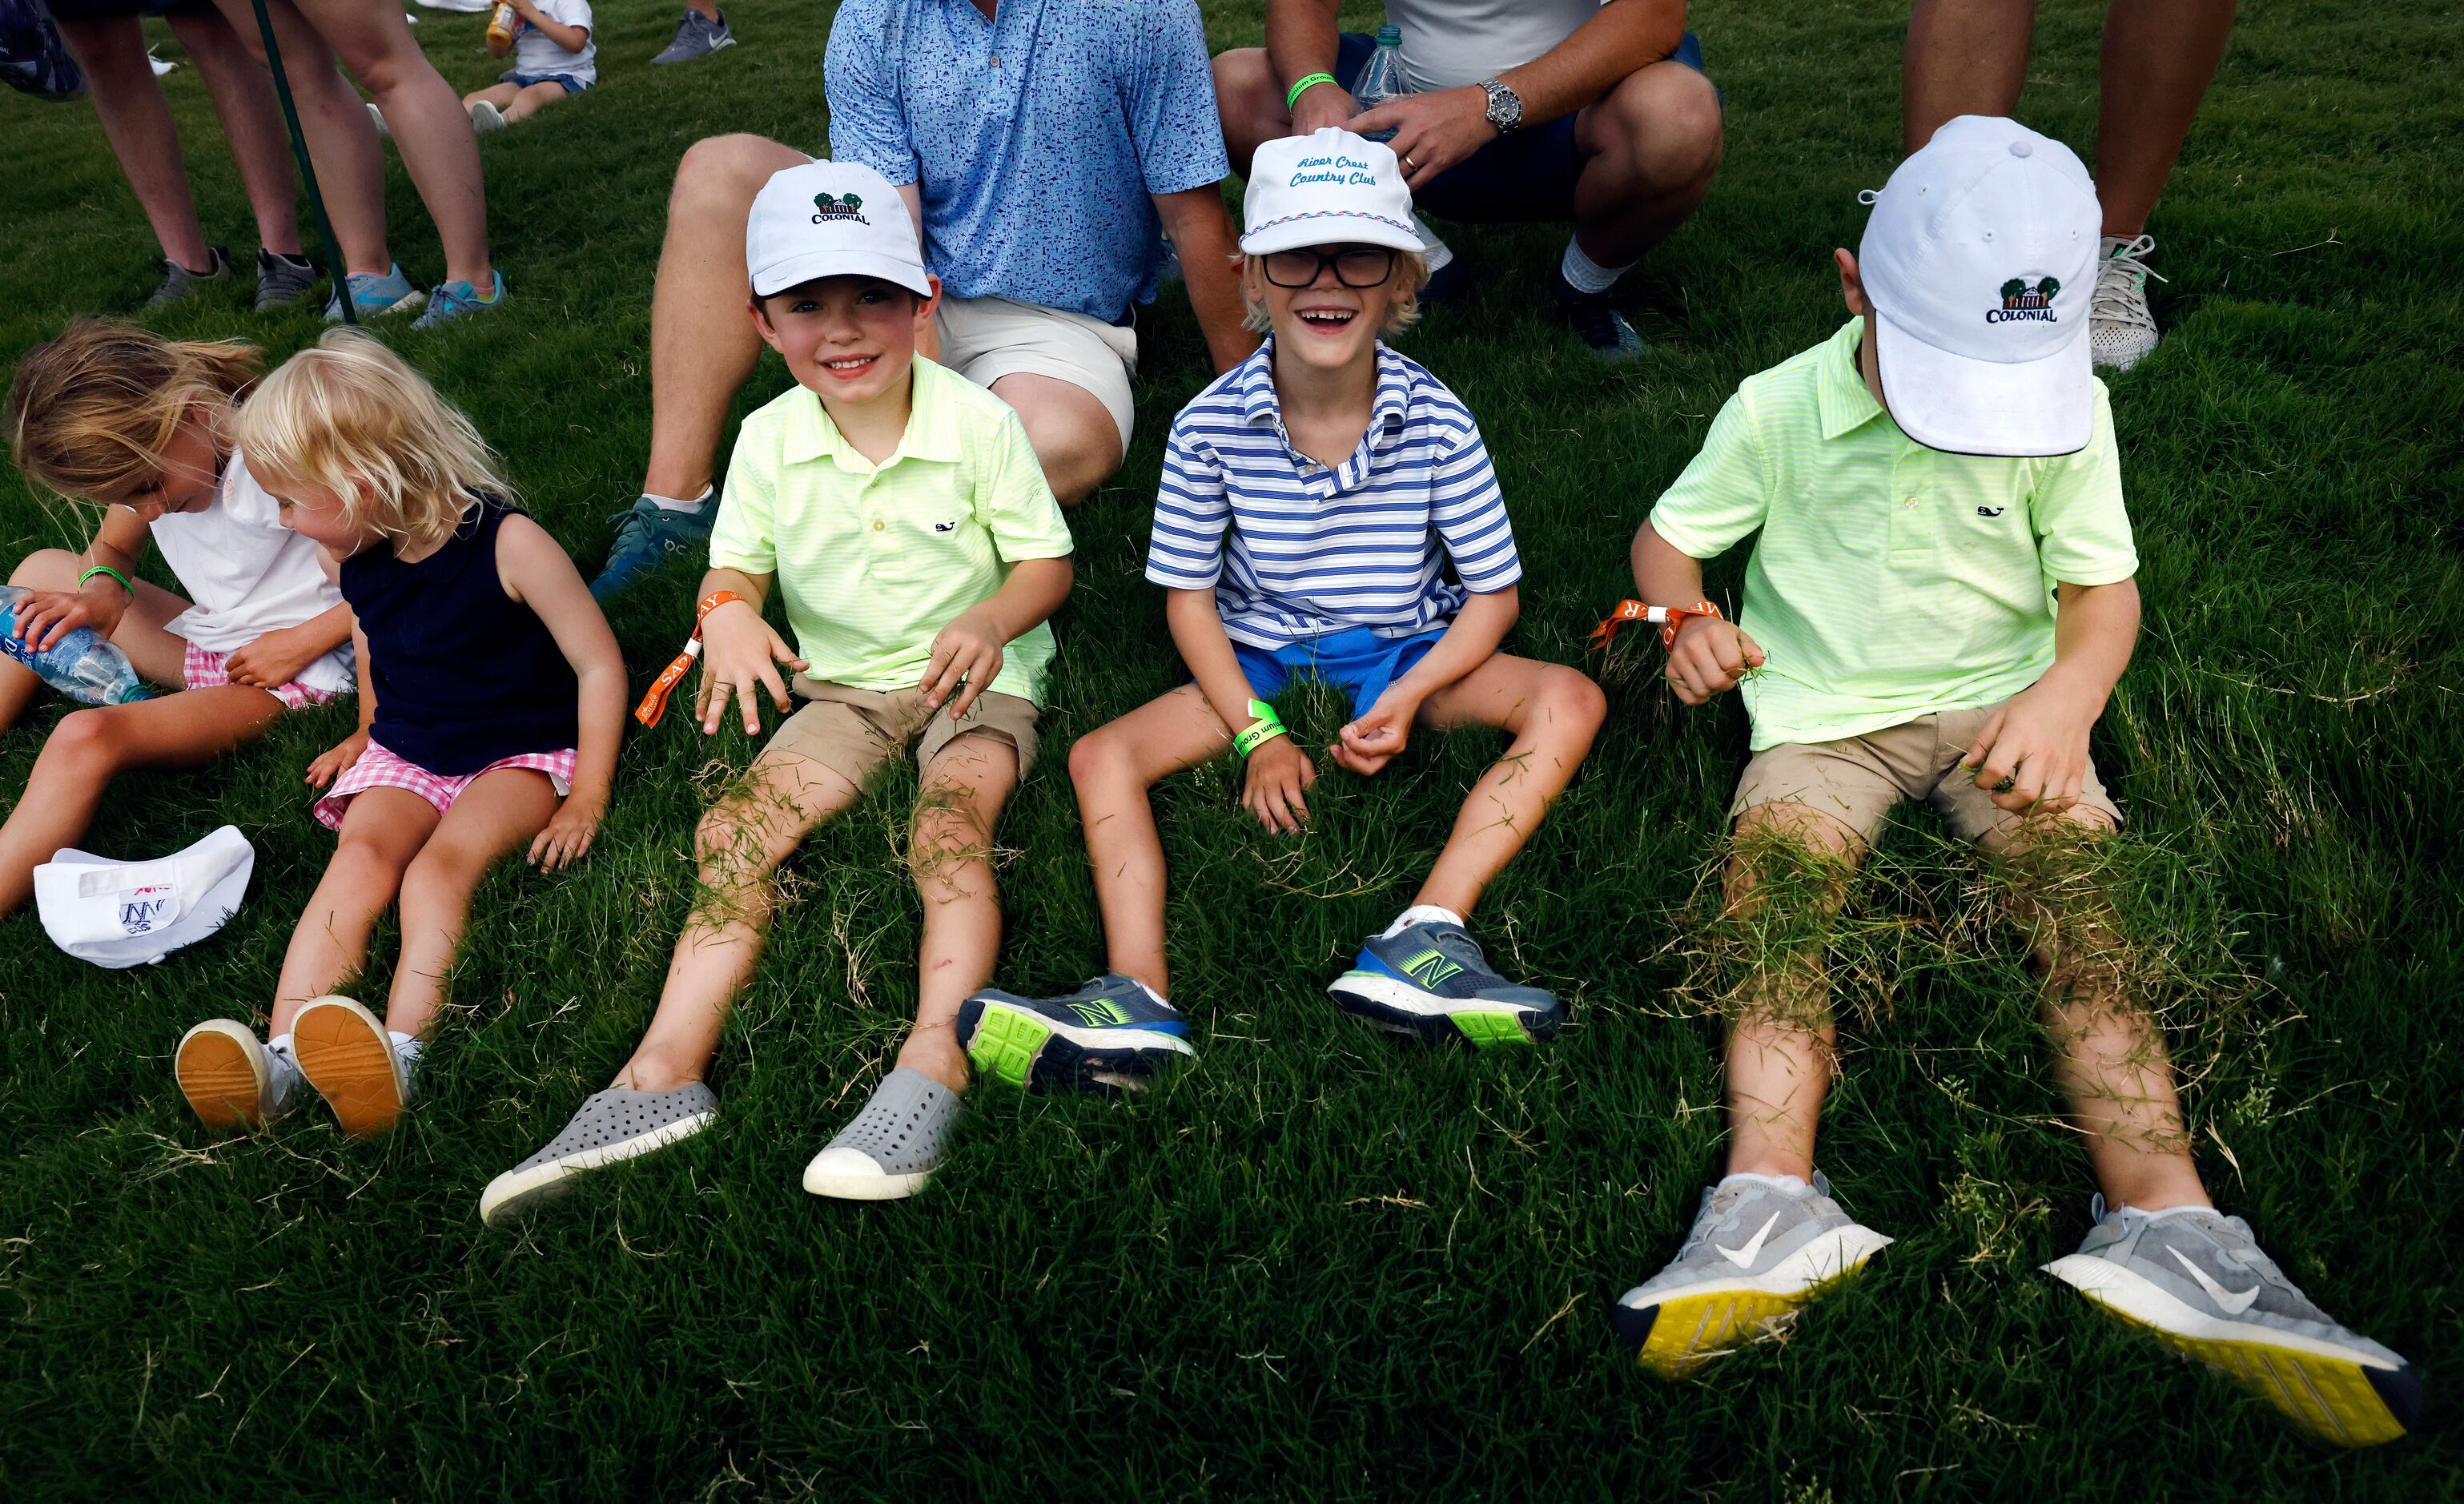 Kids waiting for professional golfer Jordan Spieth to play through on the 12th fairway,...